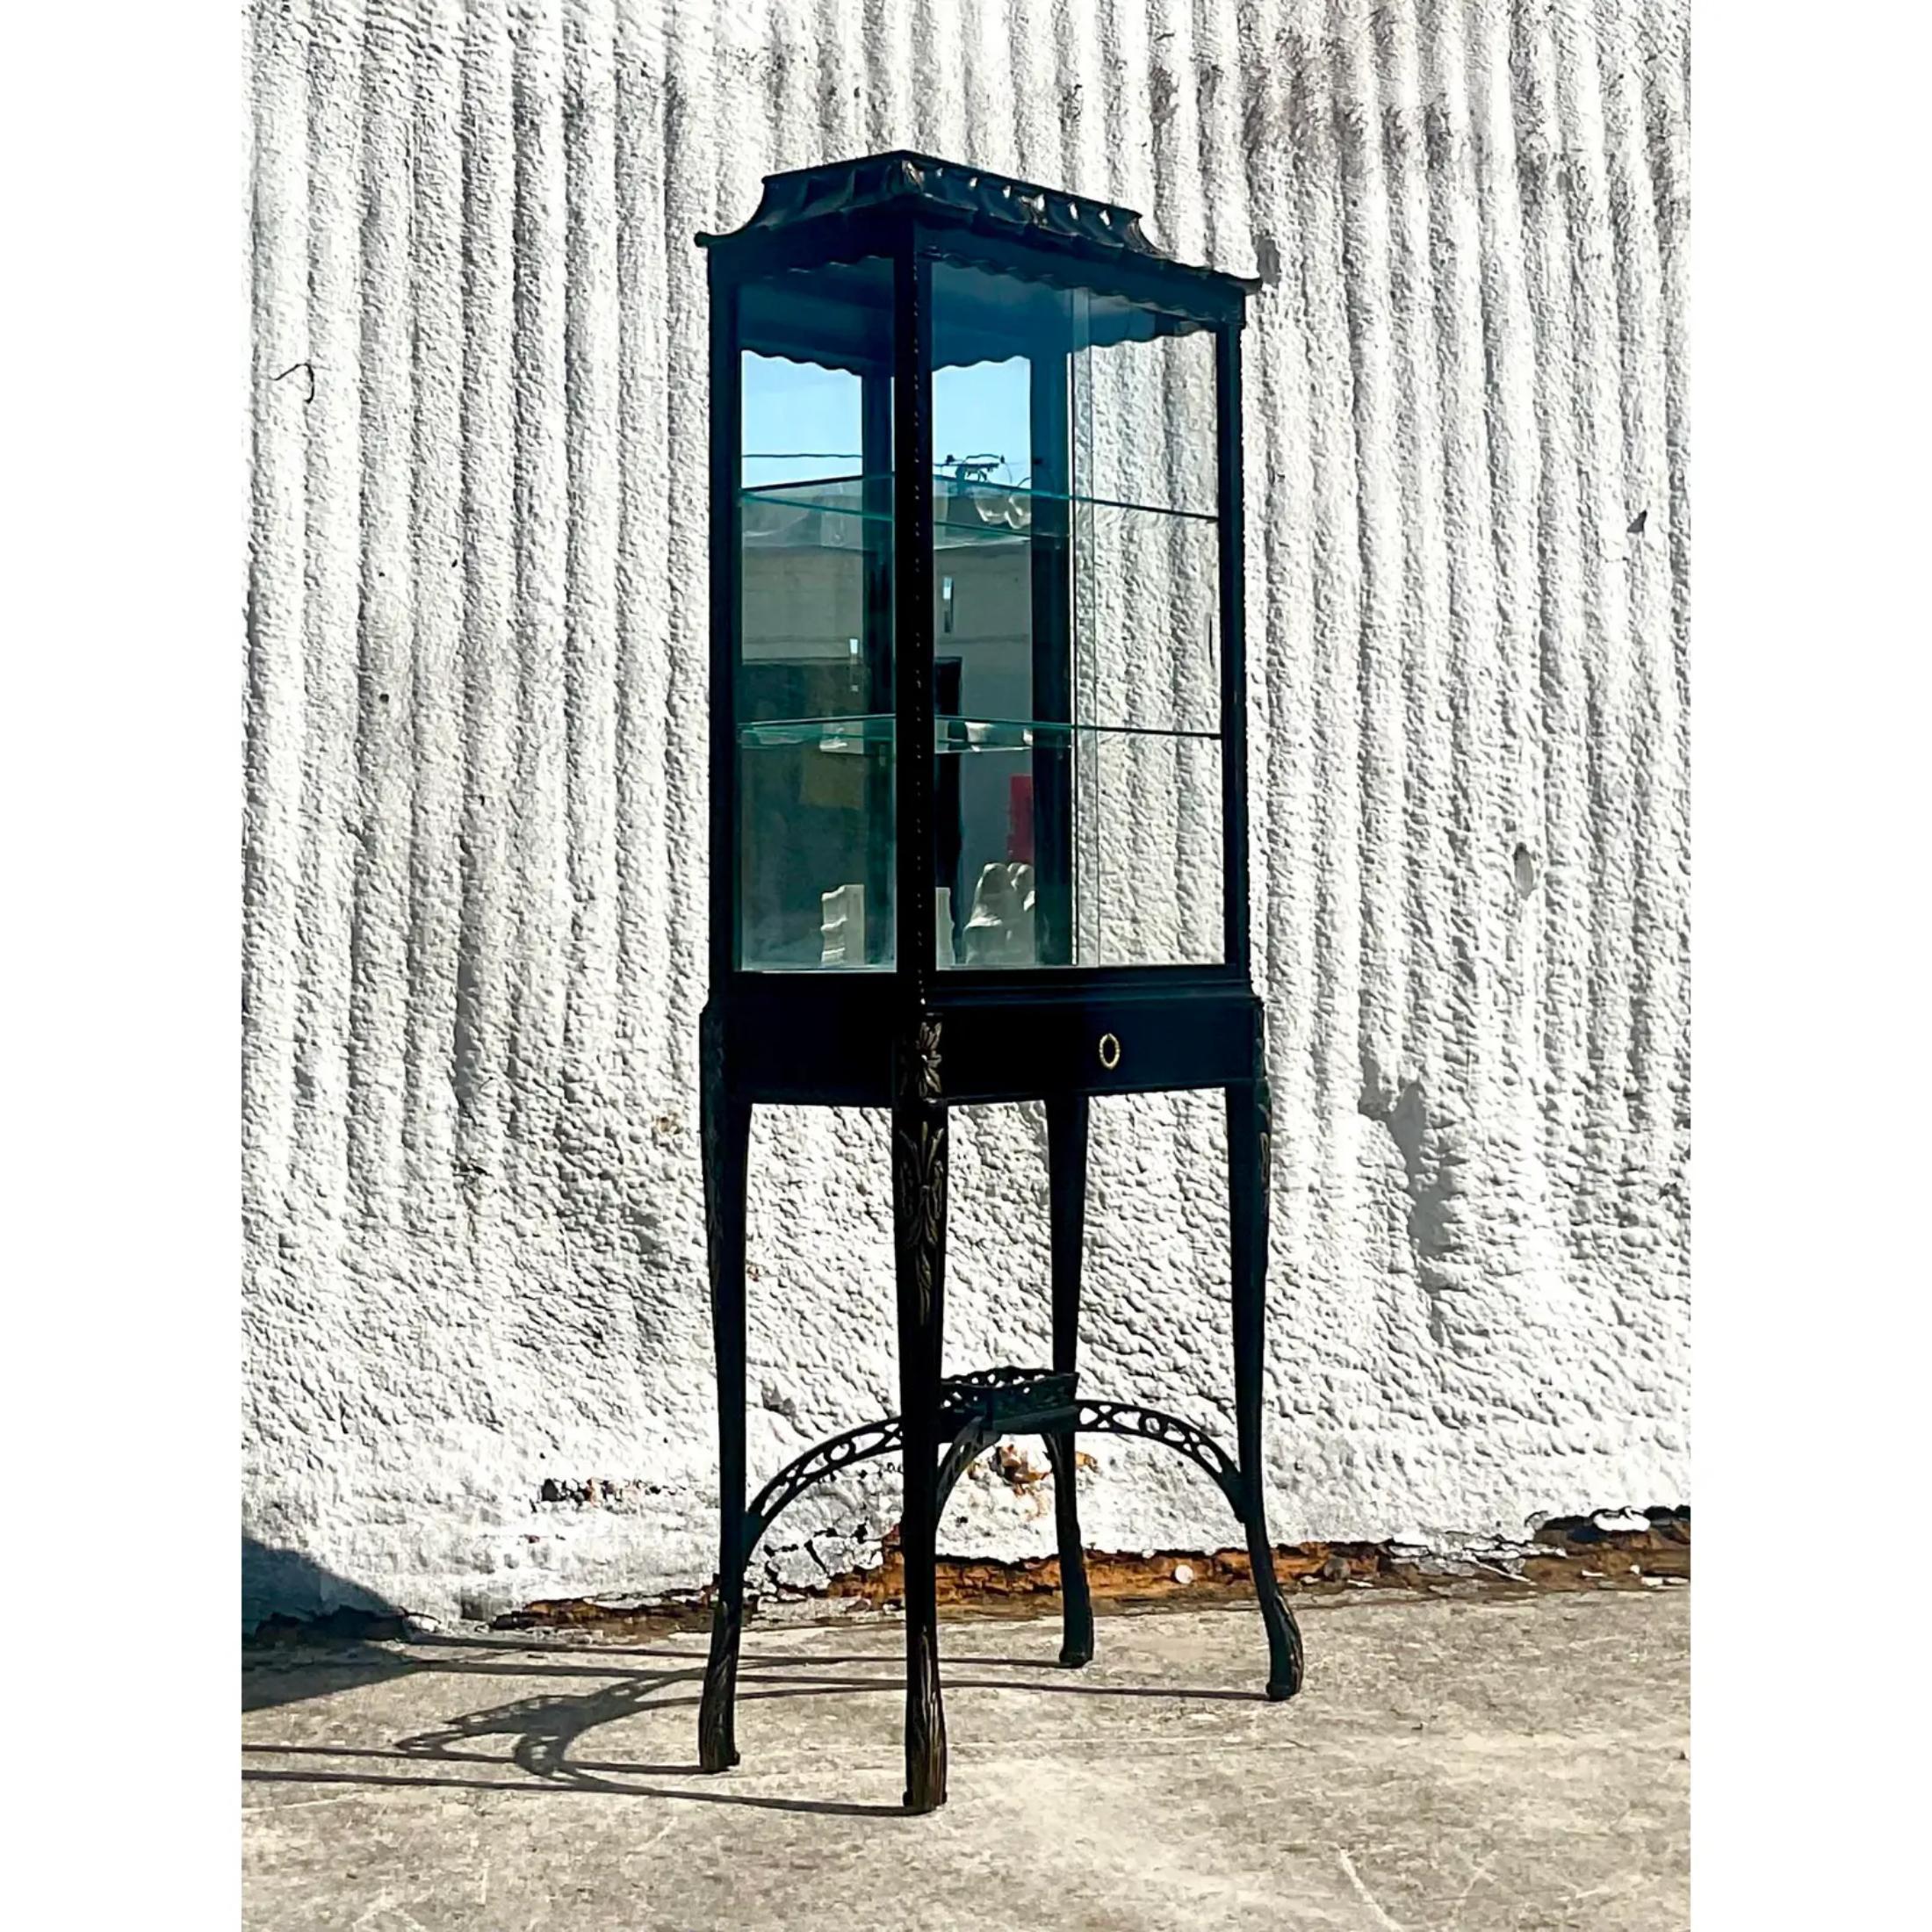 Incredible vintage Asian pagoda cabinet. Black lacquered cabinet with gold leaf flourishes. One drawer for your supplies. Tiffany blue velvet interior with glass shelves. Chic pagoda roofline. A really special piece that would add drama and glamour